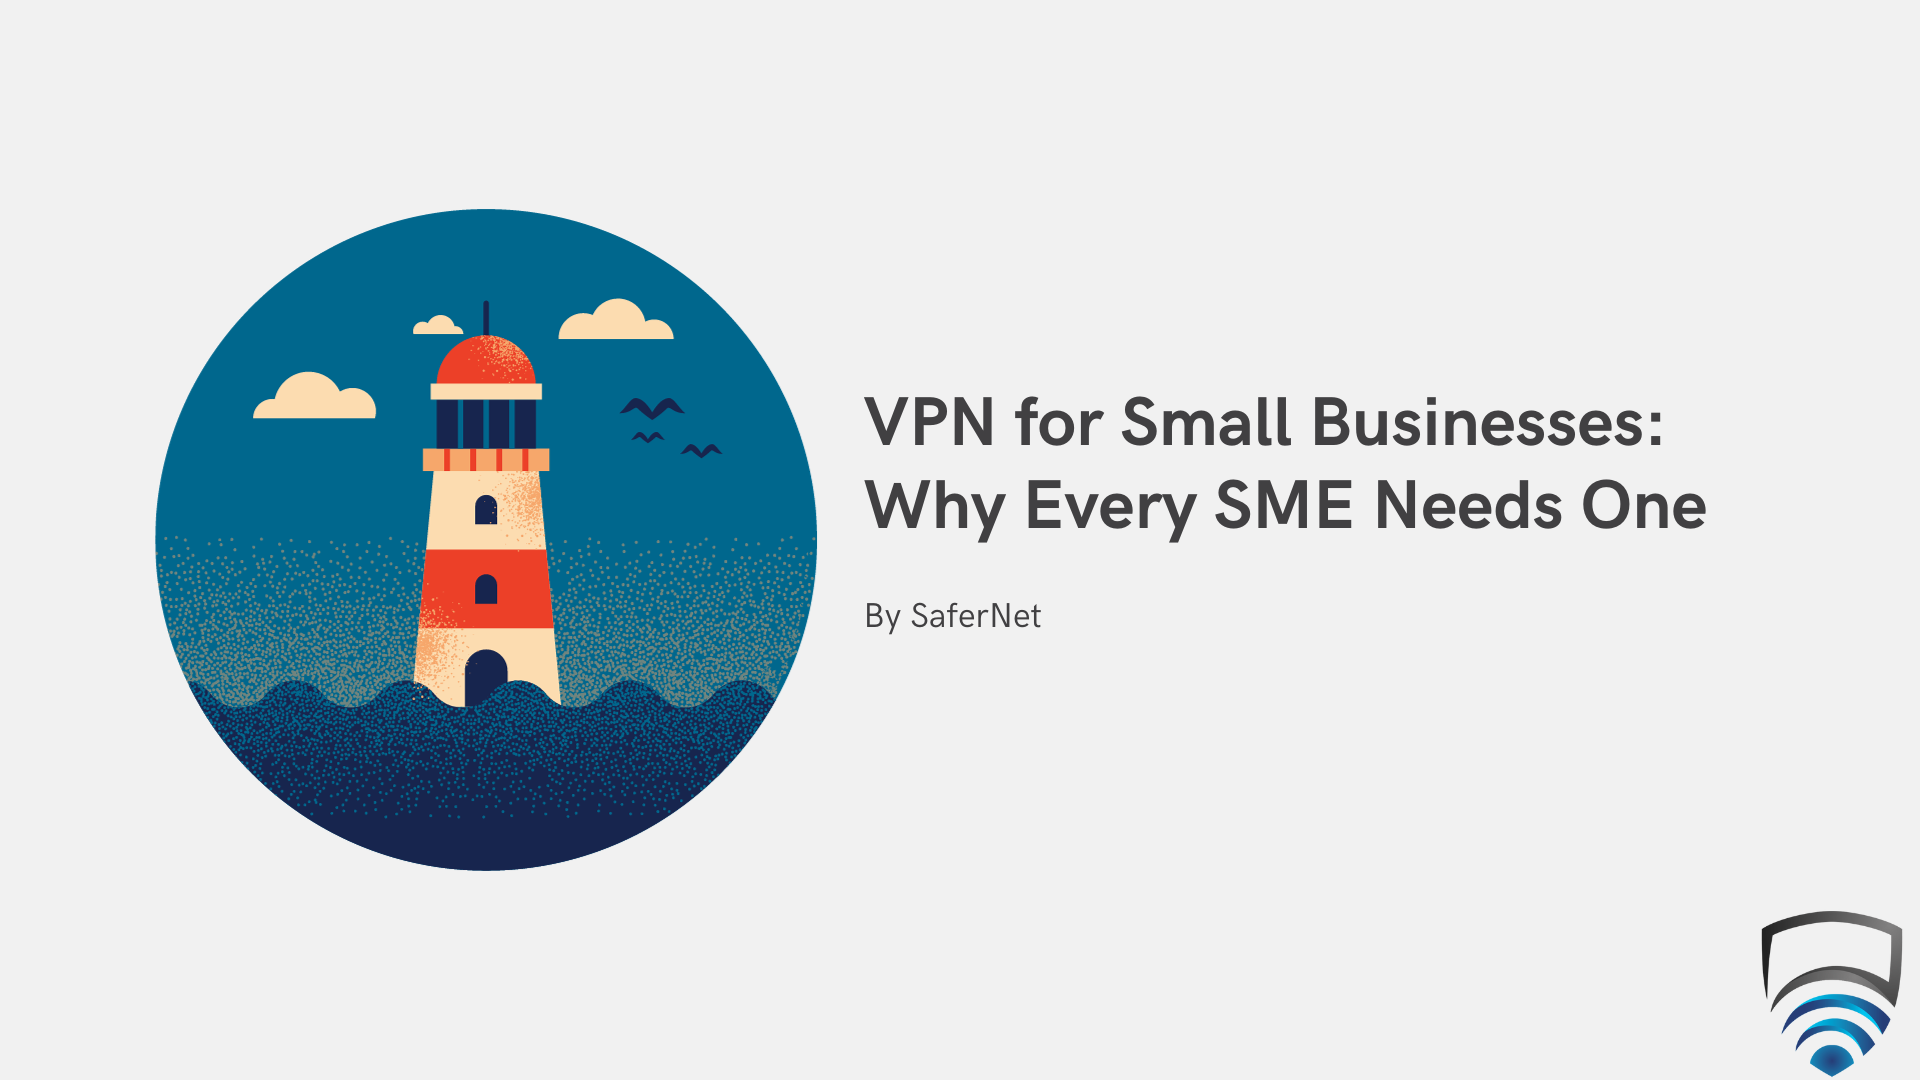 VPN for Small Businesses: Why Every SME Needs One